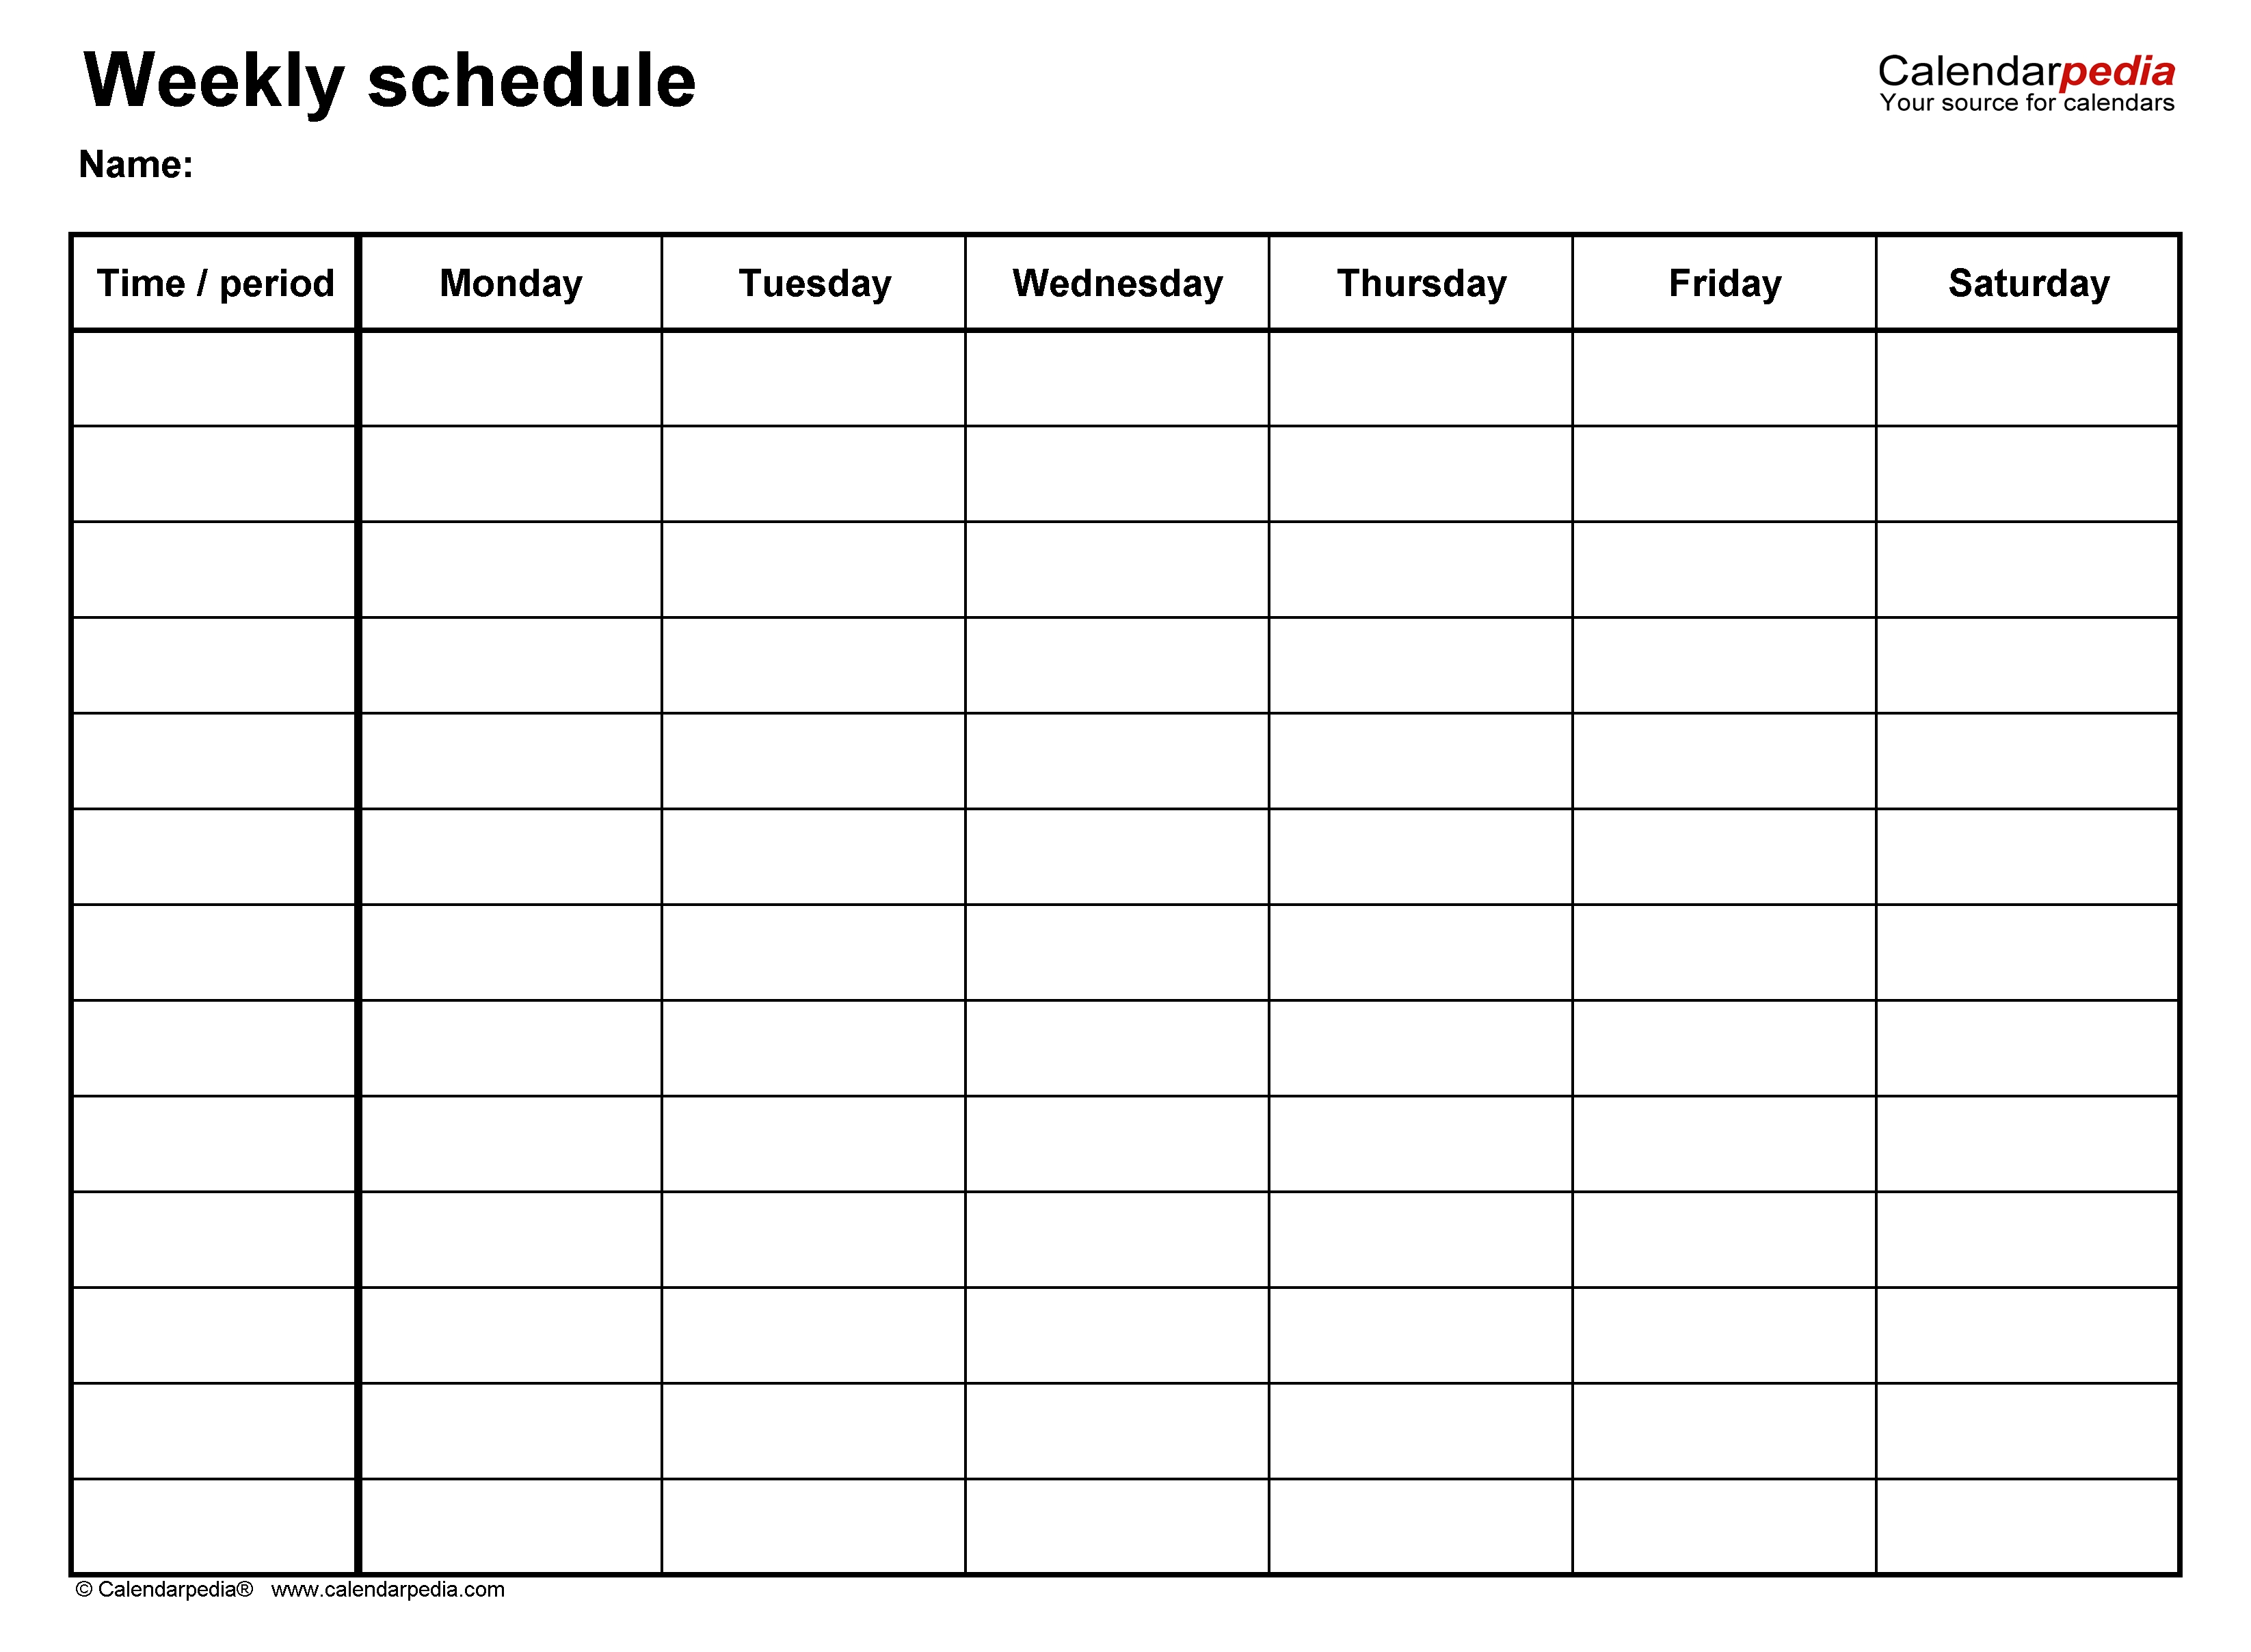 Free Weekly Schedule Templates For Excel - 18 Templates 9 Week Calendar Template